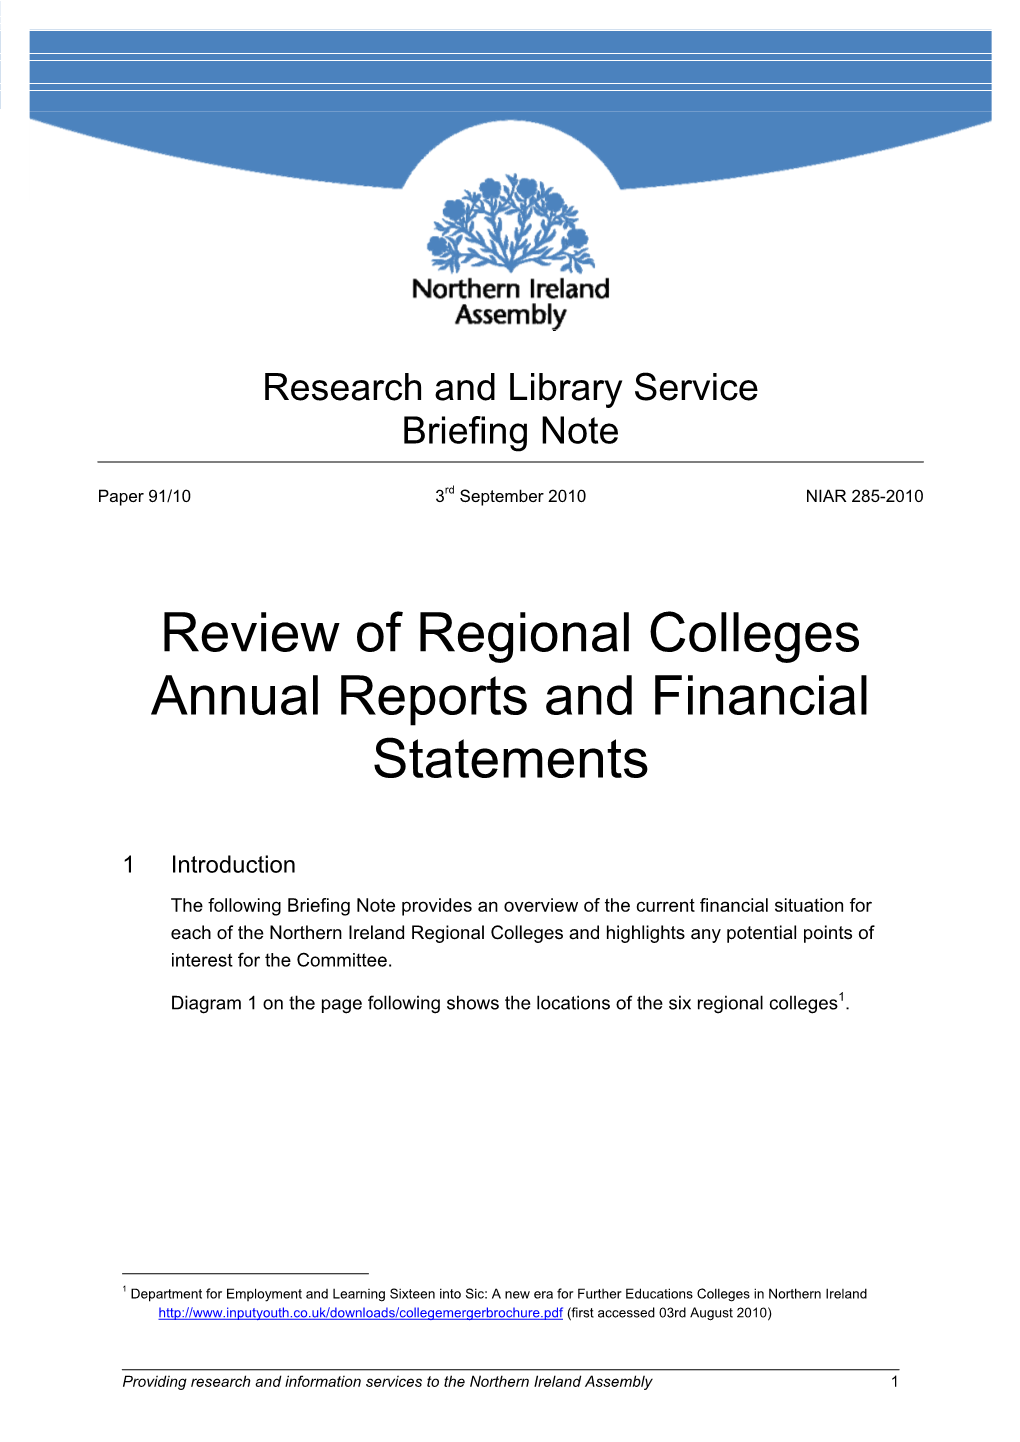 Review of Regional Colleges Annual Reports and Financial Statements